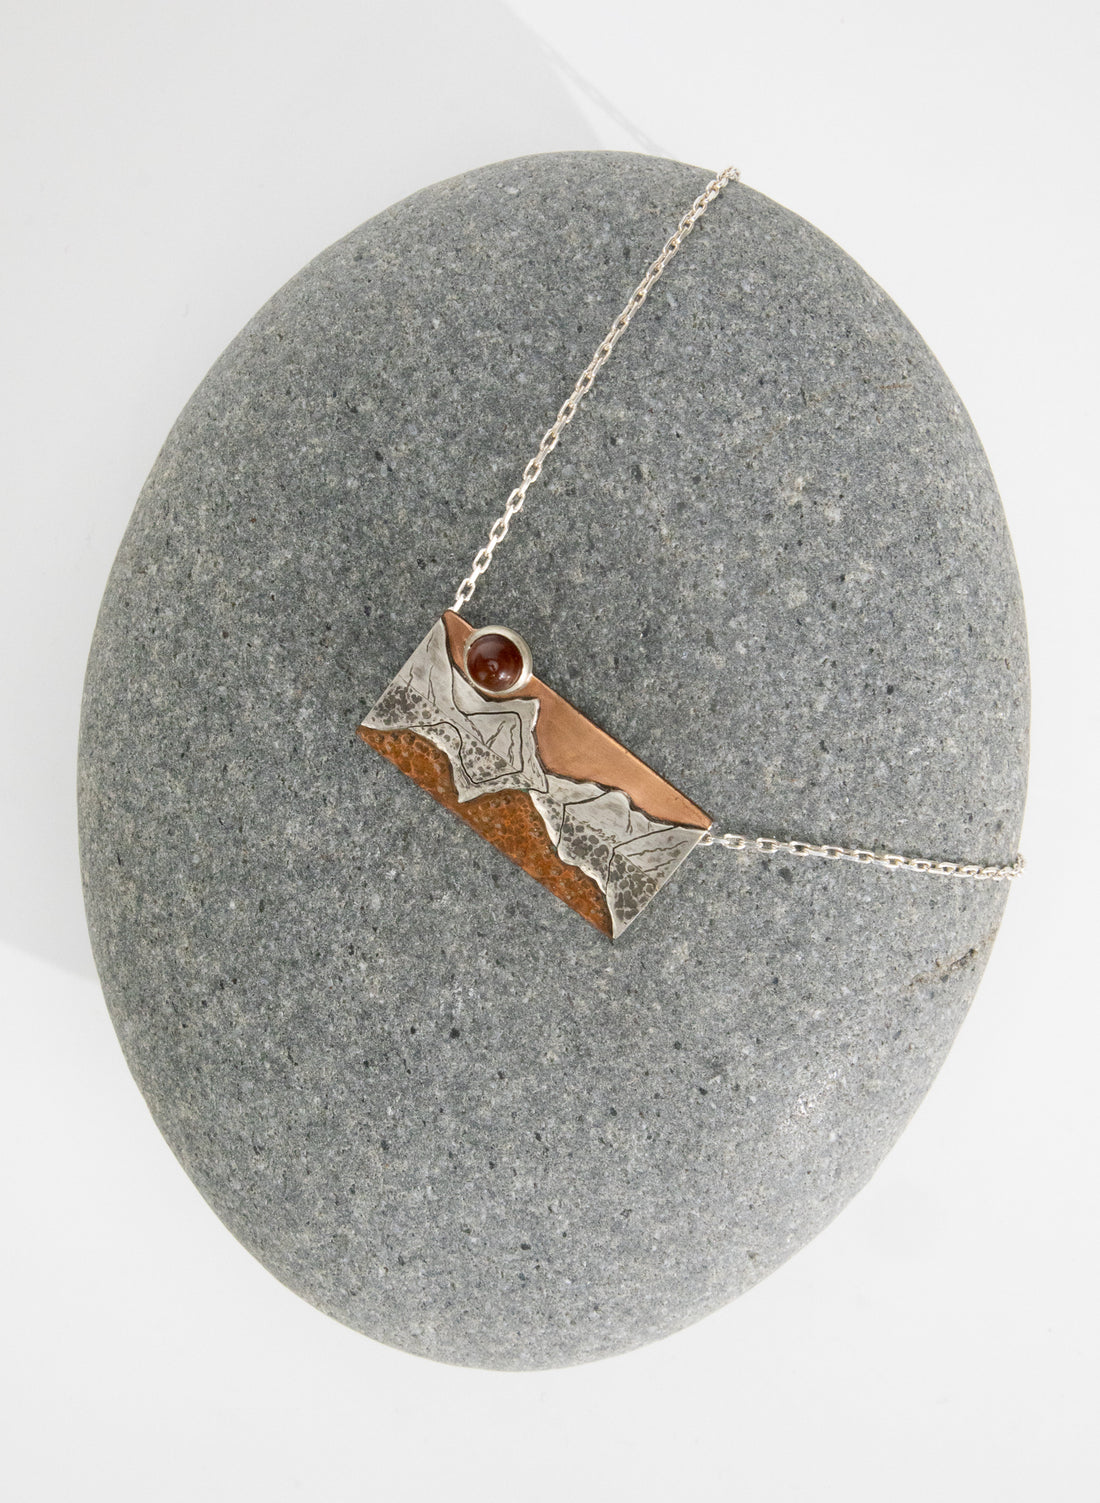 Copper and Silver Milford Sound Necklace